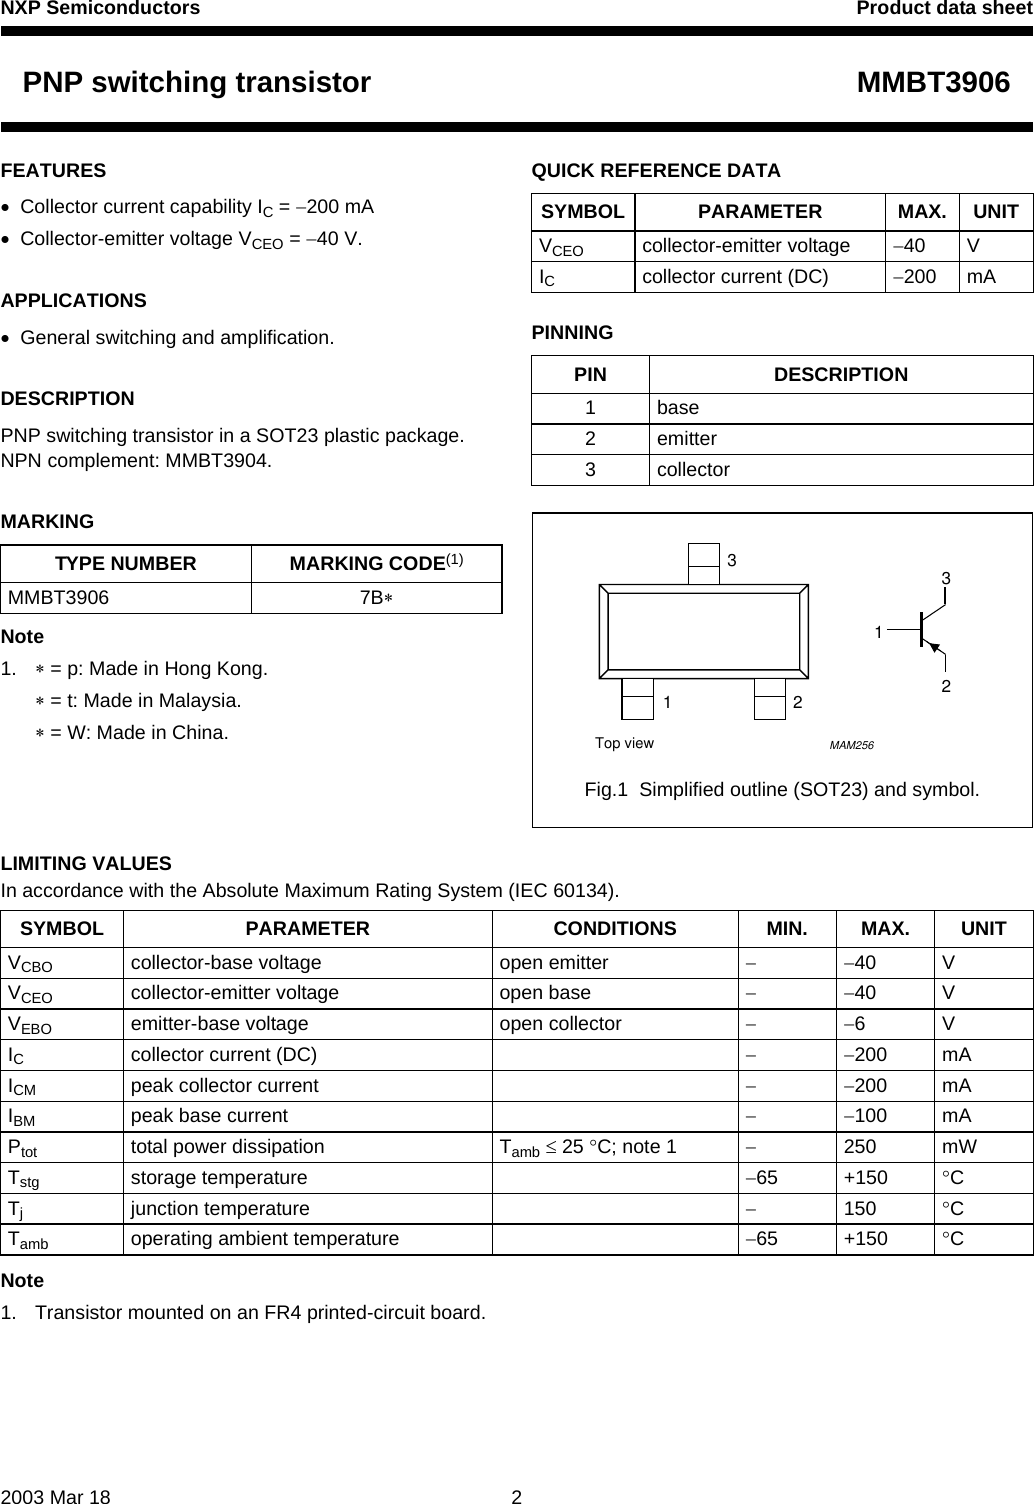 Page 2 of 8 - MMBT3906 PNP Switching Transistor Nxp